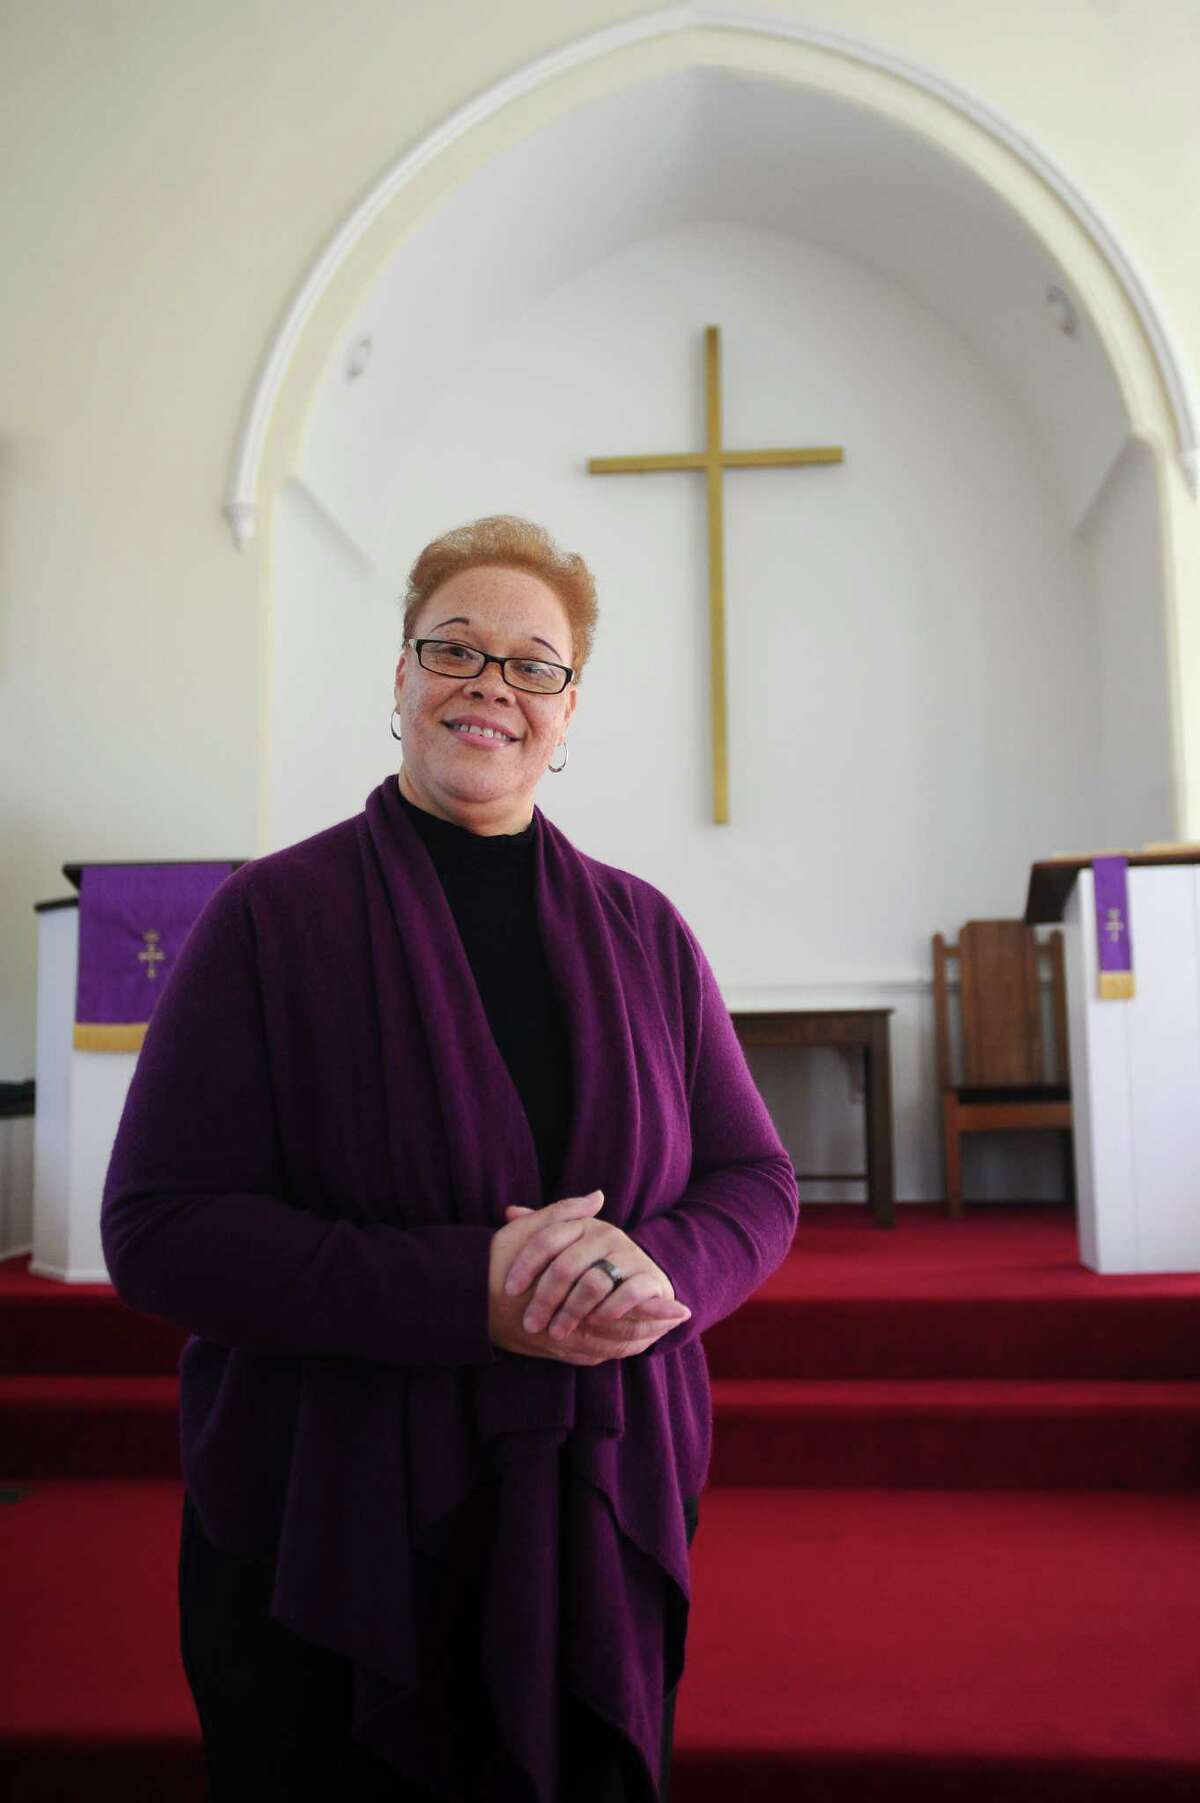 North Stamford Congretional Church Rev. Jacqueline Gilchrist poses for a photo inside her church on Thursday, Feb. 18, 2016. Rev. Gilchrist says she does not like to stand at the alter and preach, but instead gives a sermon while walking around interacting with her parishoners.